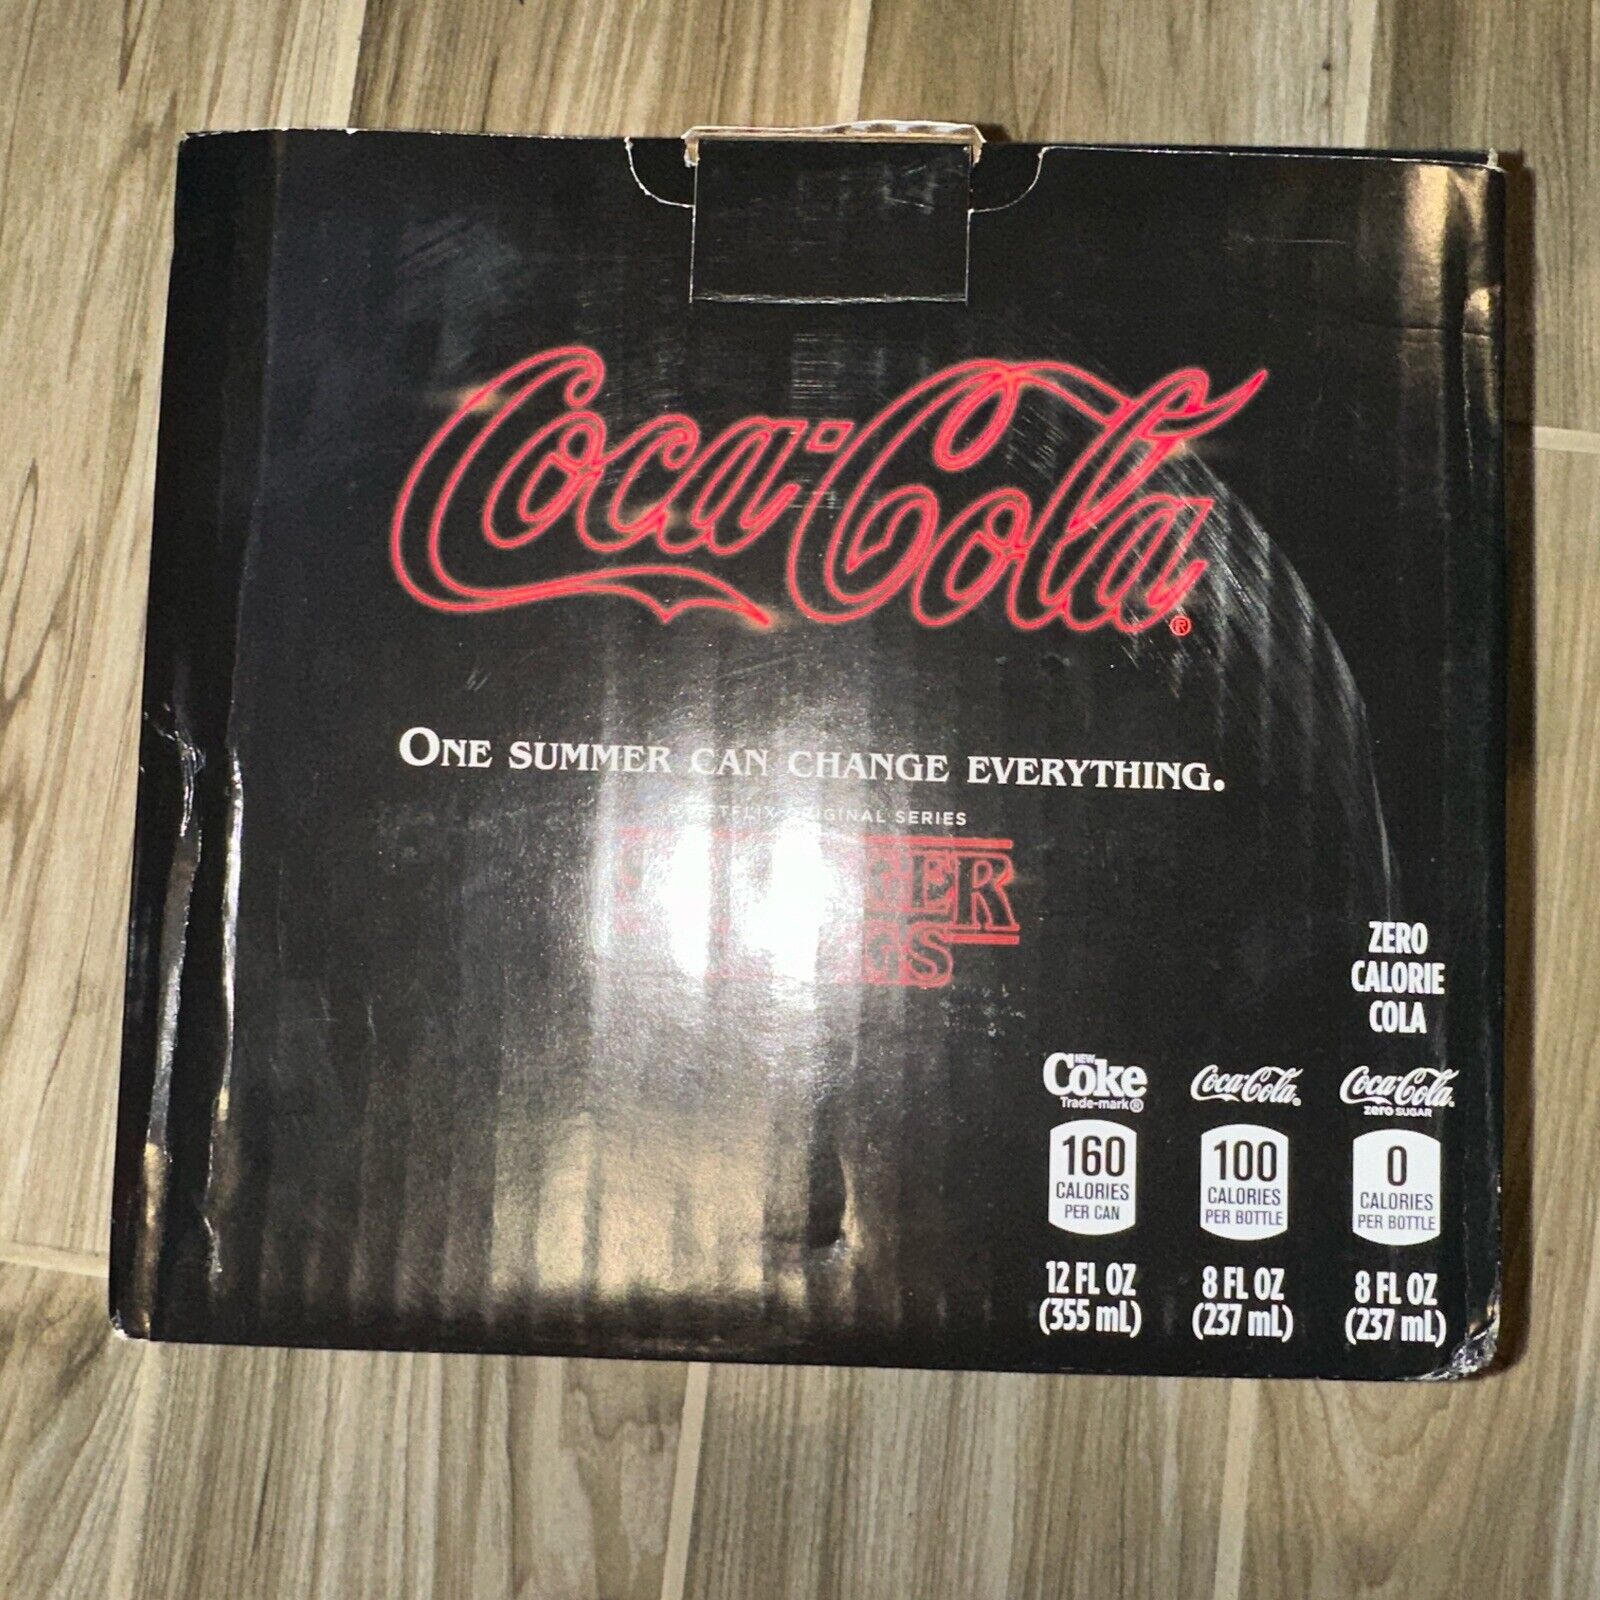 Stranger Things New Coke Coca Cola 1985 Limited Edition Collectors Edition Pack